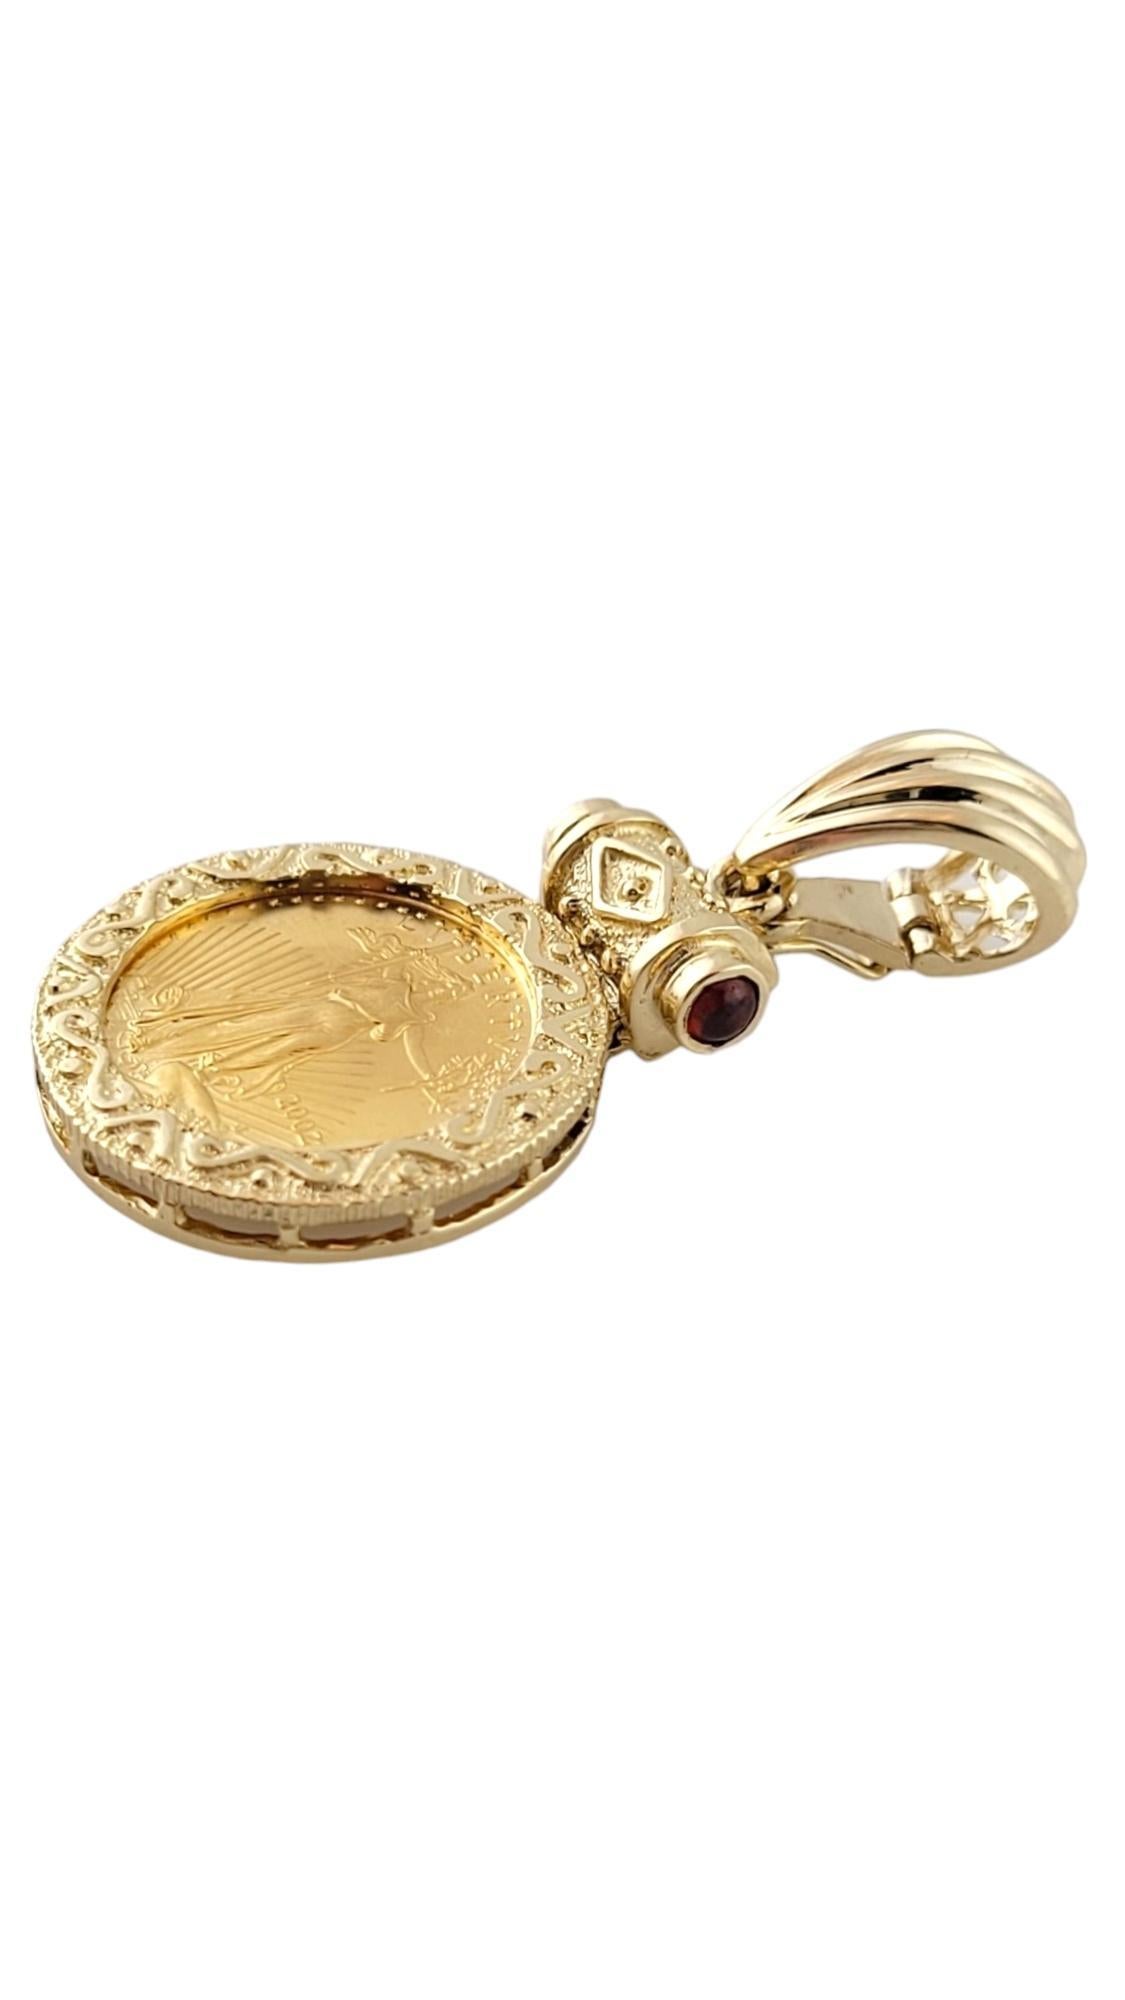 Vintage 14K Yellow Gold Framed Gold Eagle Pendant

This beautiful pendant features a 2002 1/10th oz. American Gold Eagle $5.00 coin with a 14K yellow gold frame with cabochon reddish-brown accents ono the hinge!

Size: 26.8mm X 20.4mm X